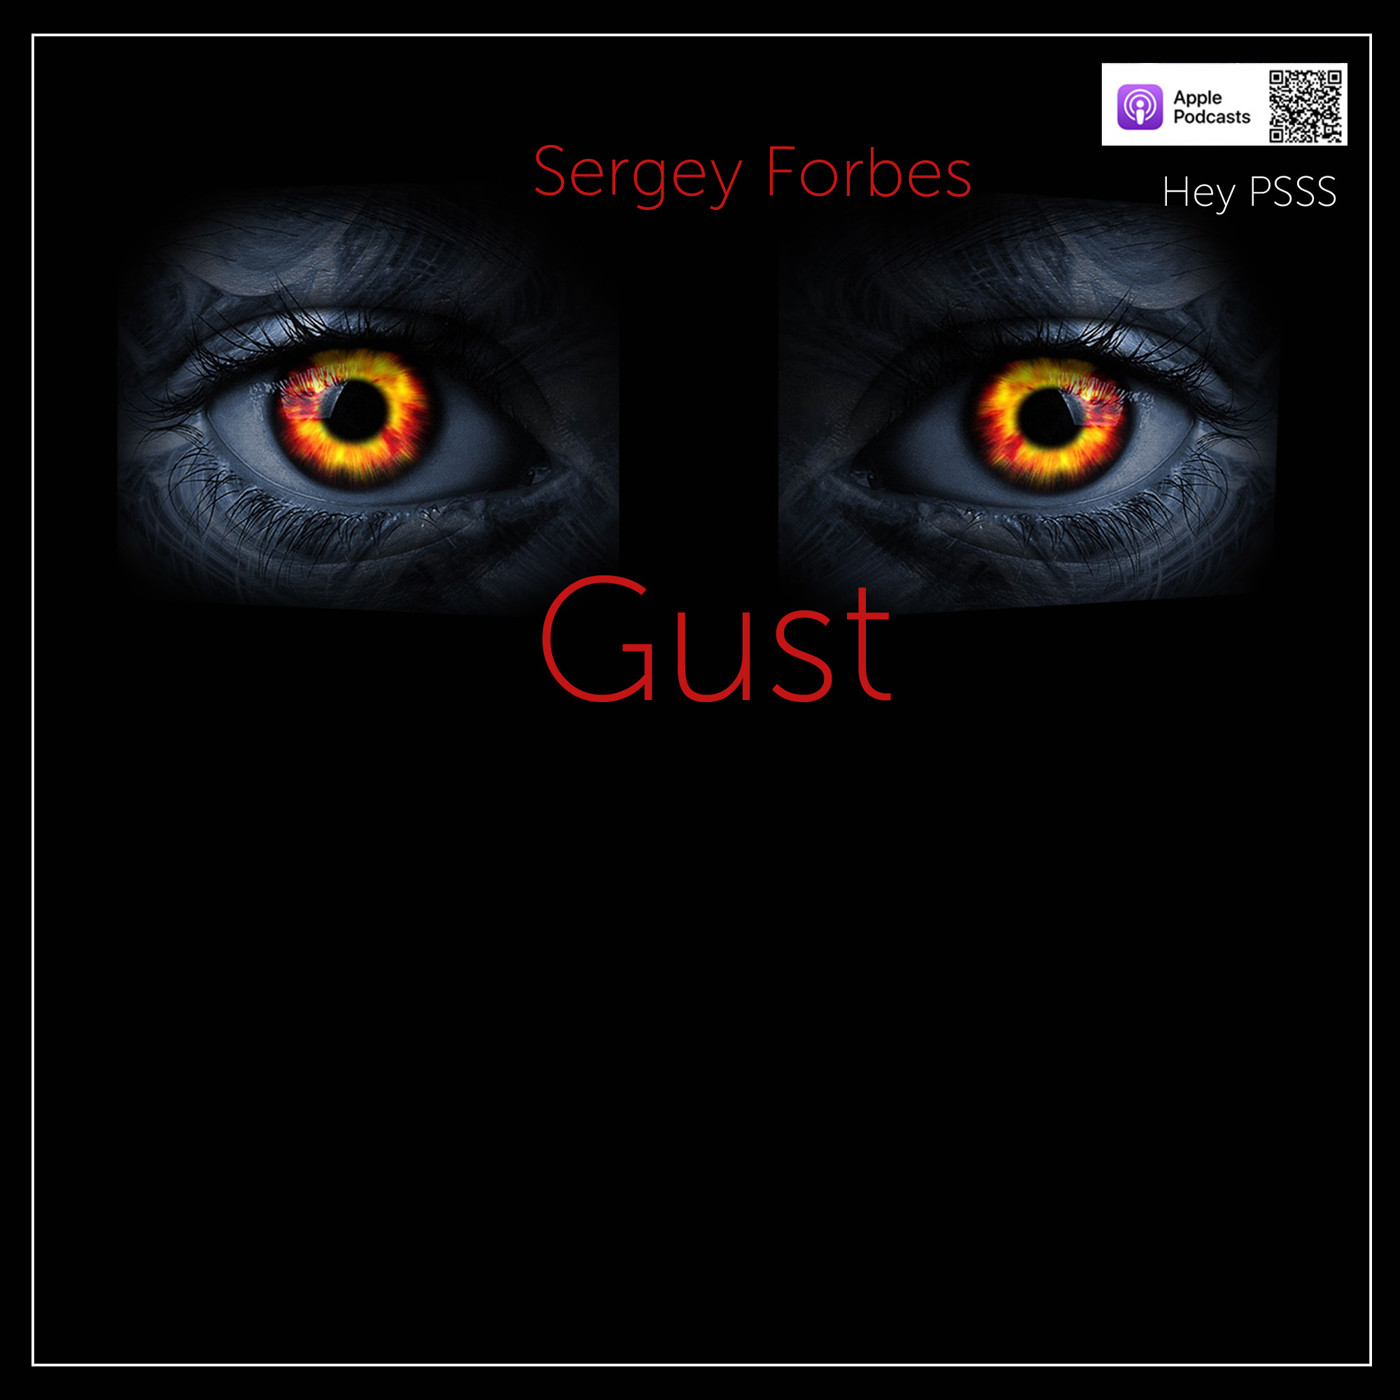 SERGEY FORBES - GUST